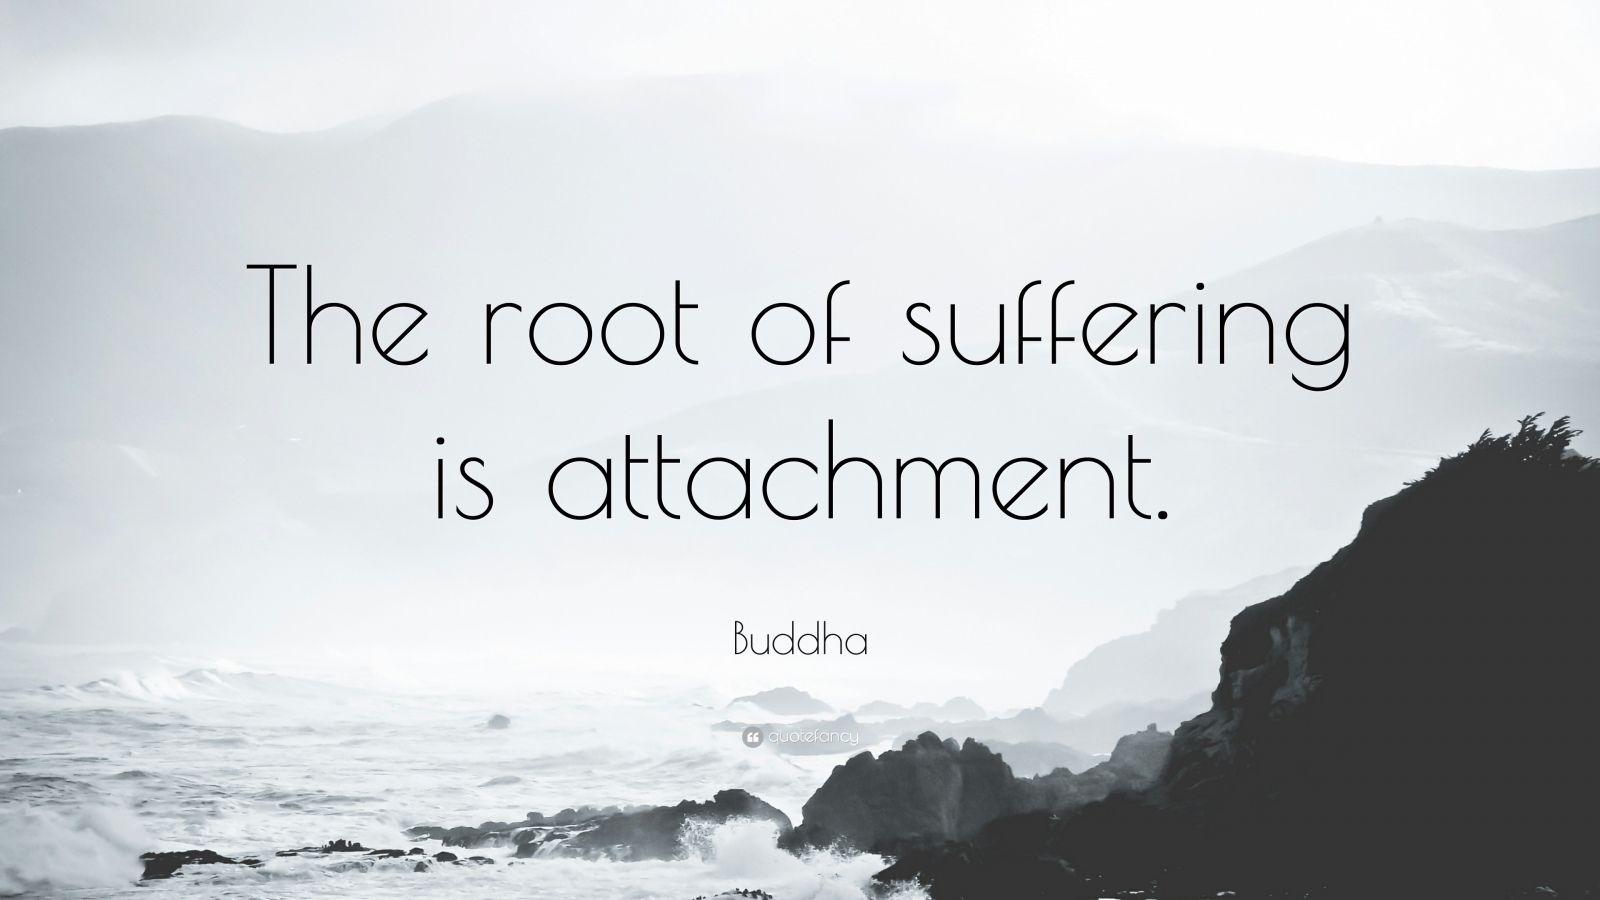 Buddha Quote: “The root of suffering is attachment.” 9 wallpaper